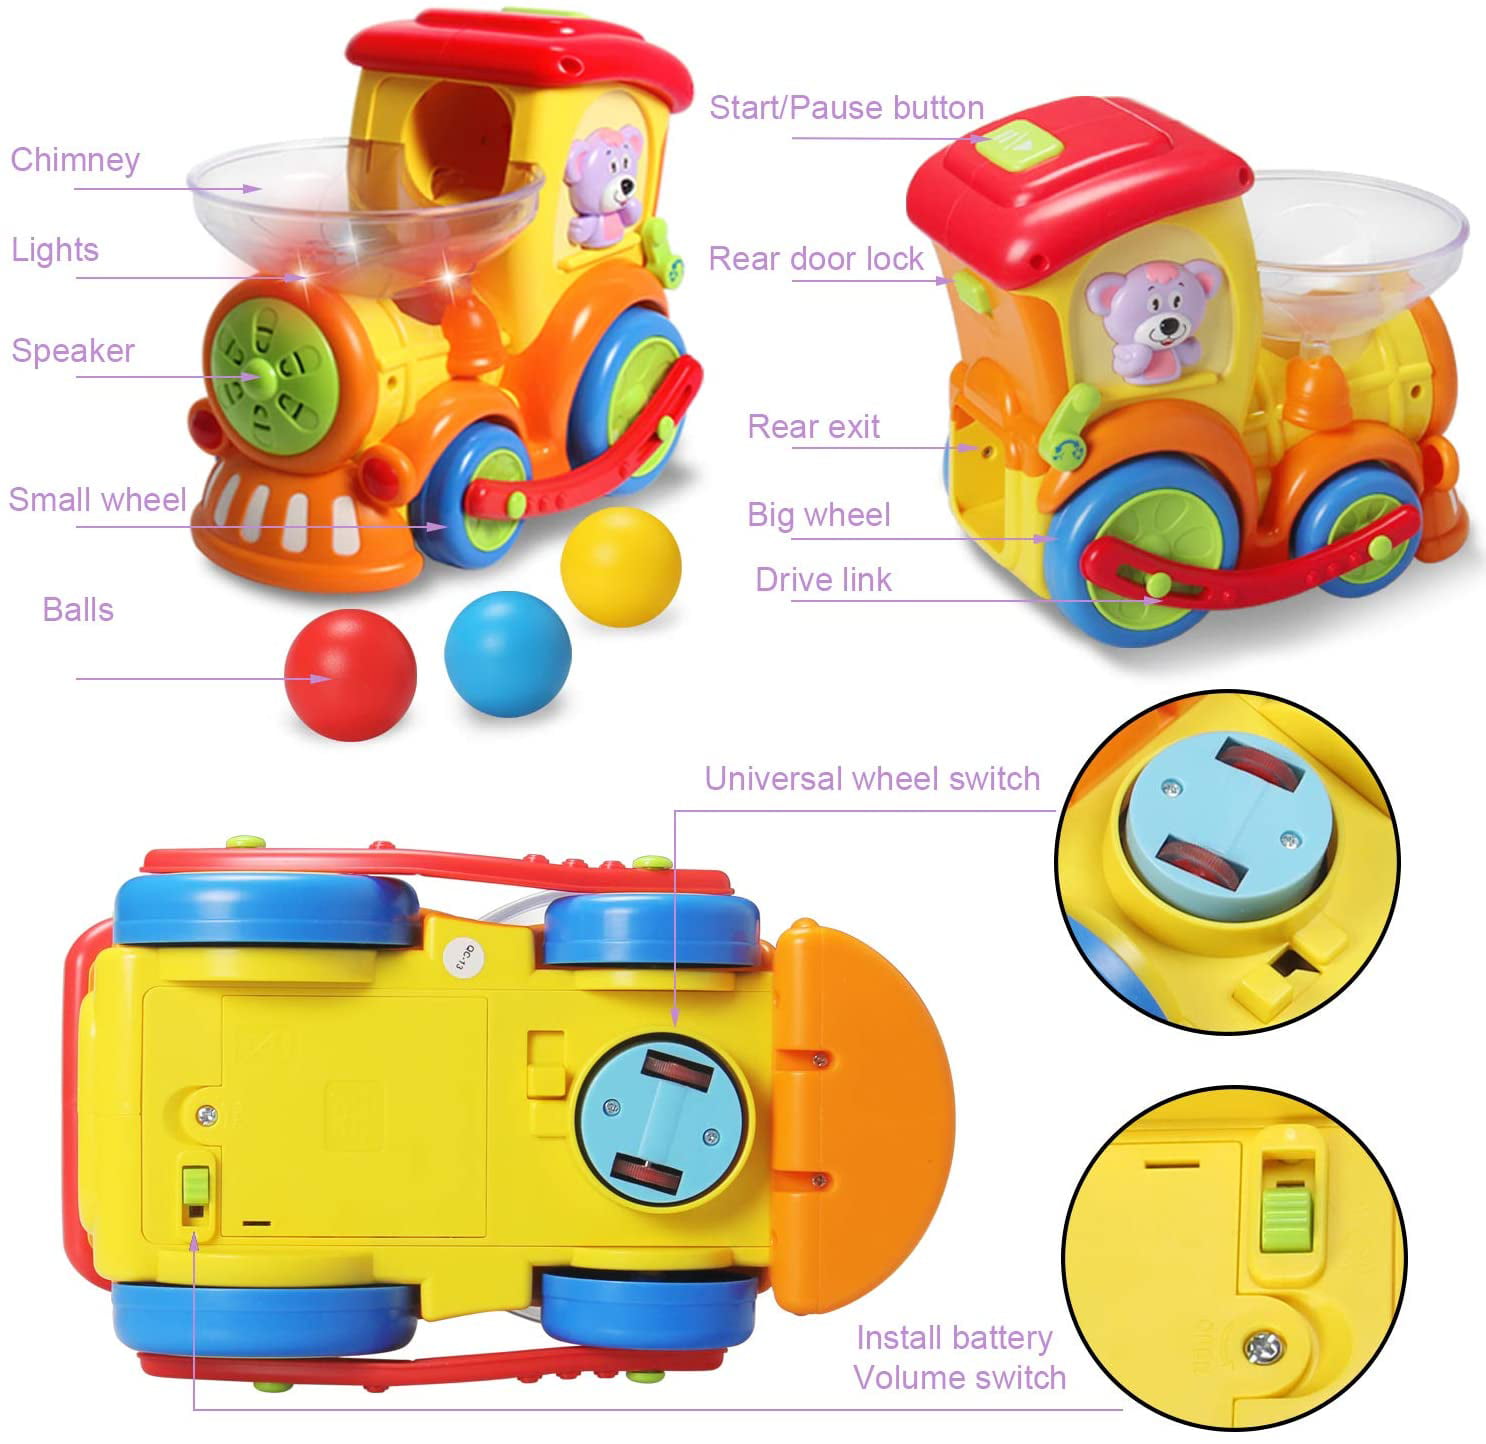 baby toys 12-18 months old toys are suitable for 1 year old boys drop and  forward train ball Popper toys, suitable for toddlers with 3 balls,  light/speaking/music early education gift toys 